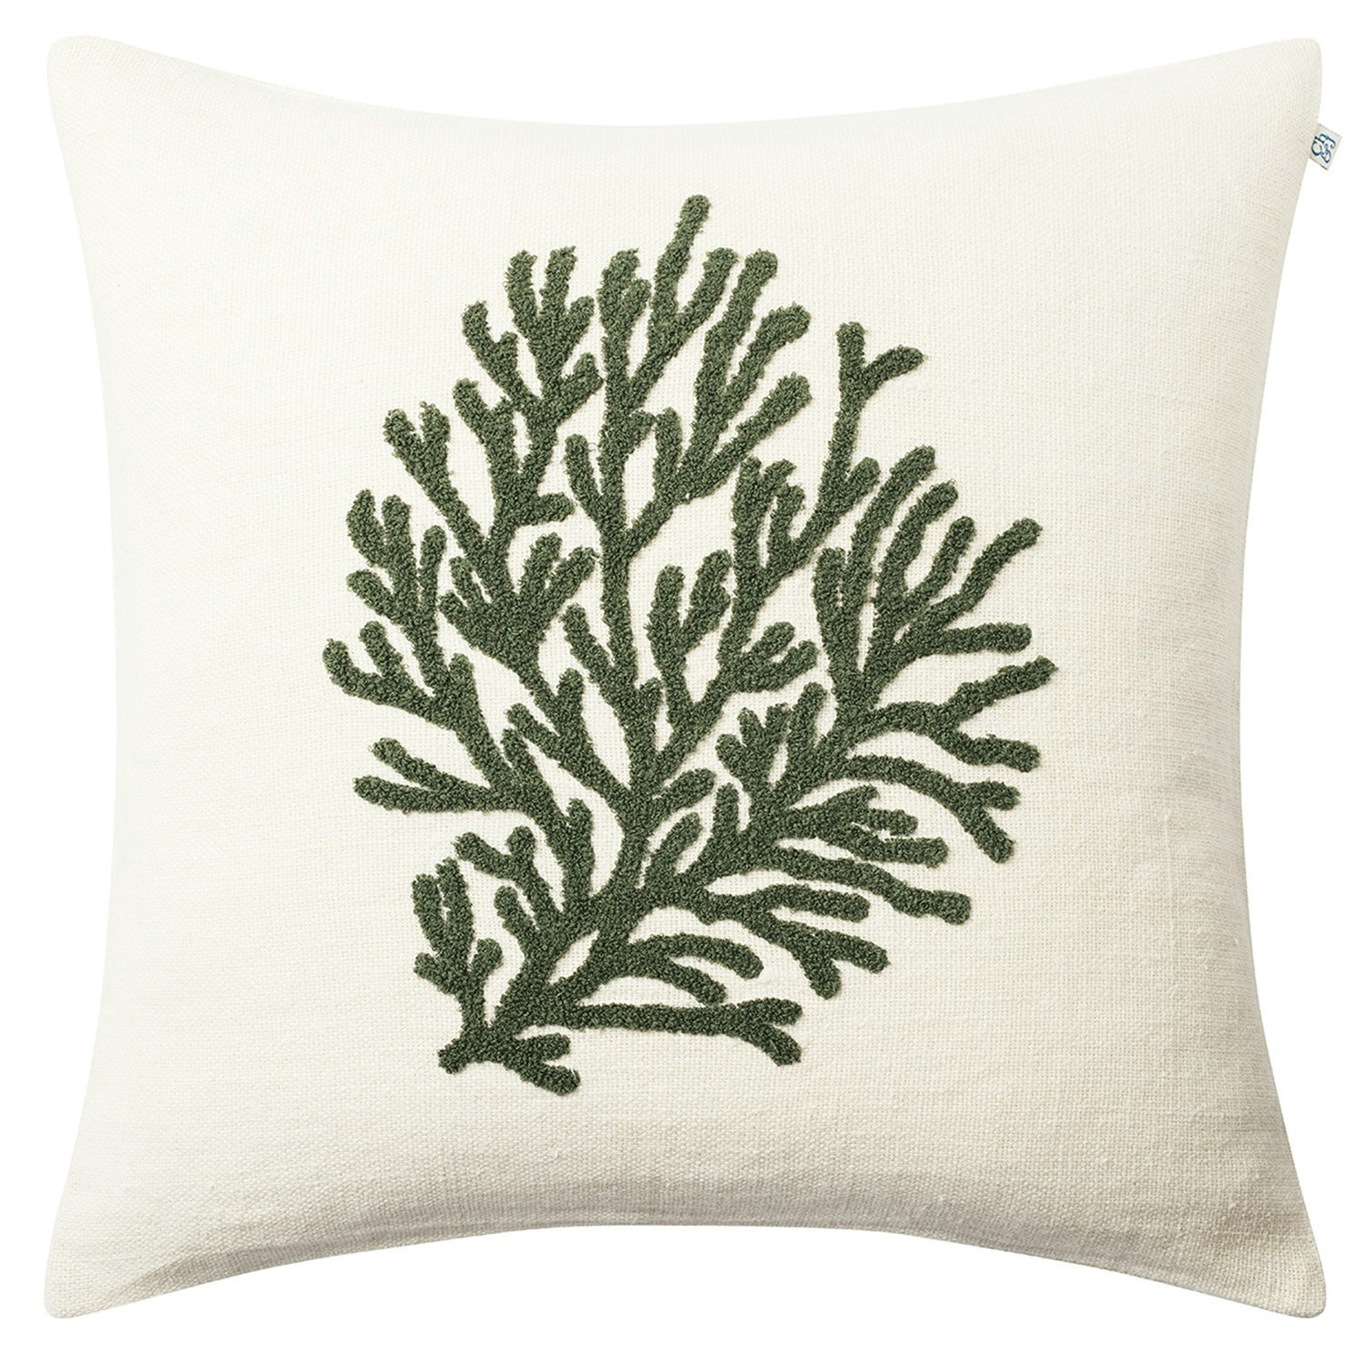 Coral Kuddfodral 50x50 cm, Off-white/Cactus Green